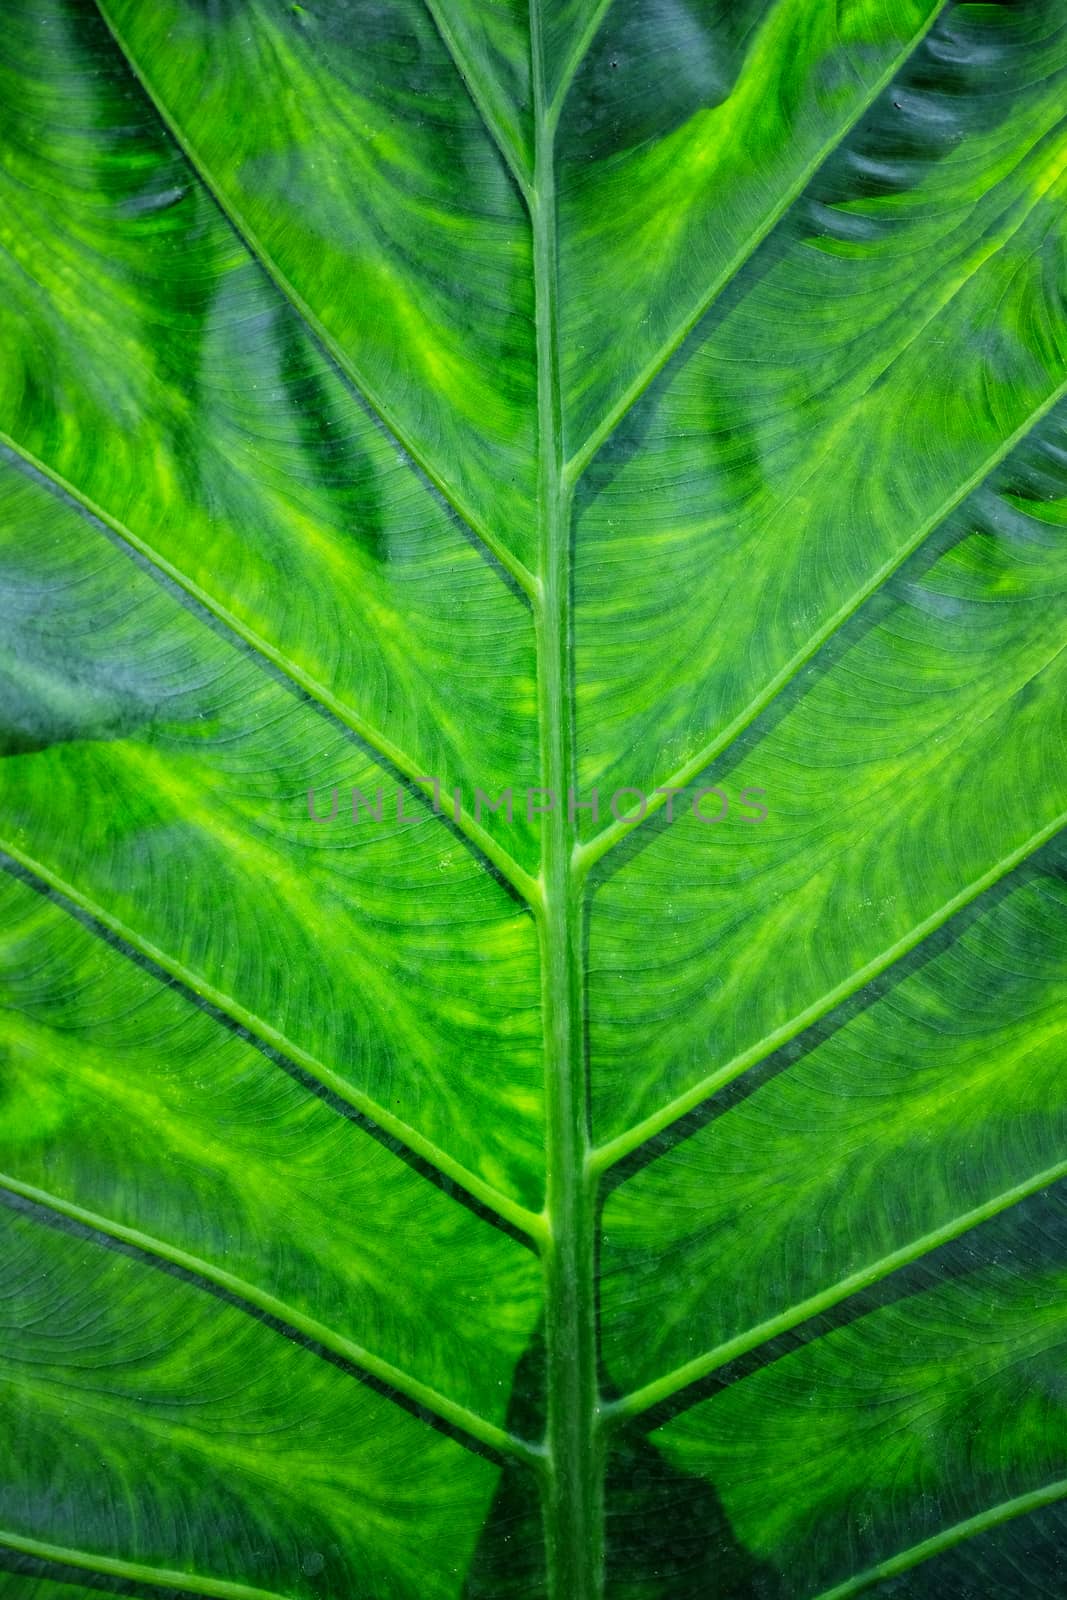 Texture and detail of a green leaf as background by Surasak